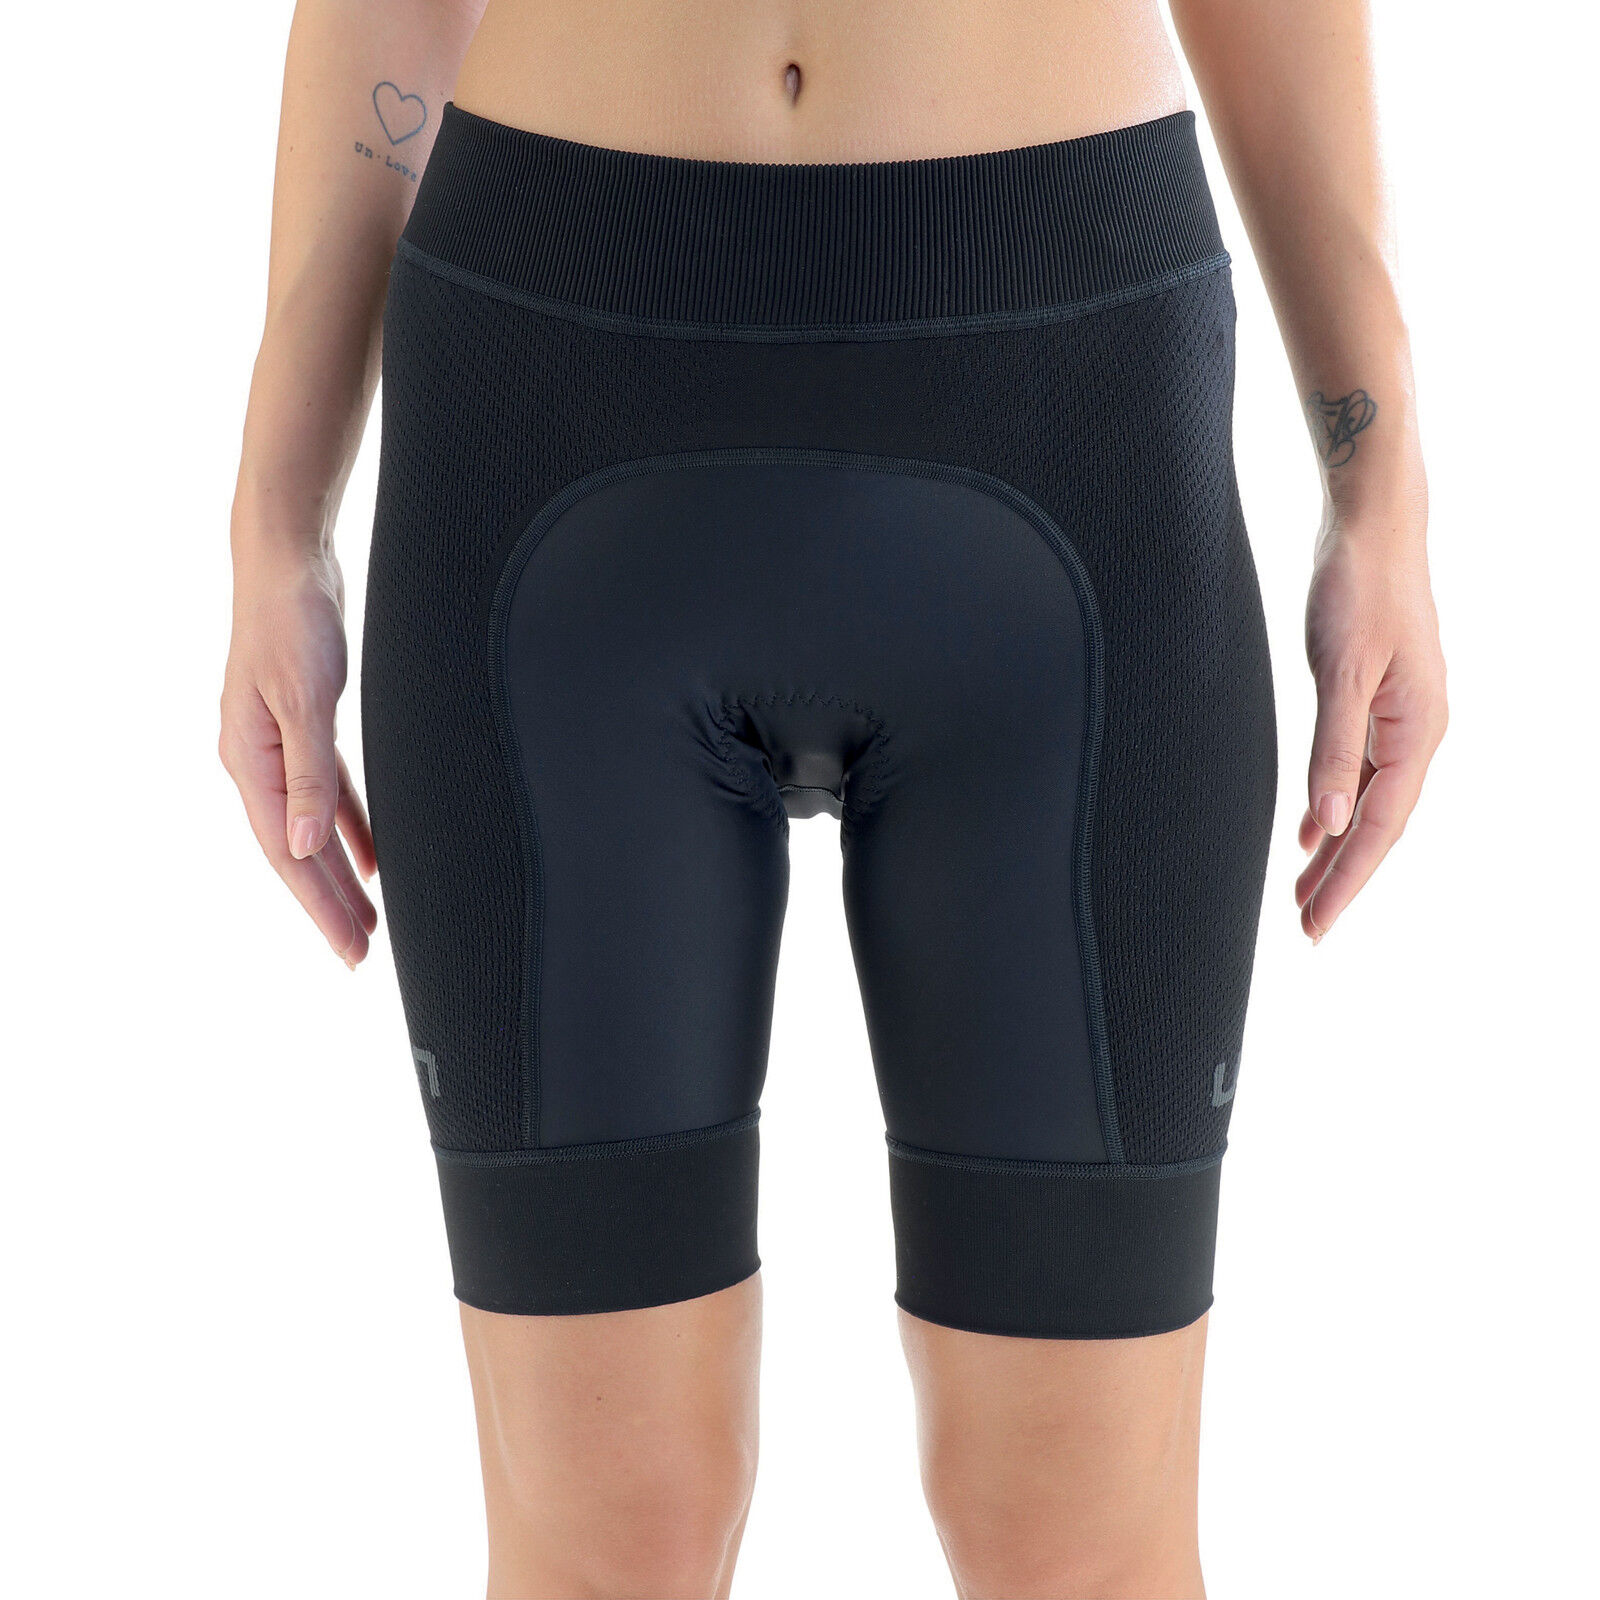 Uyn Ridemiles - Culottes de ciclismo - Mujer